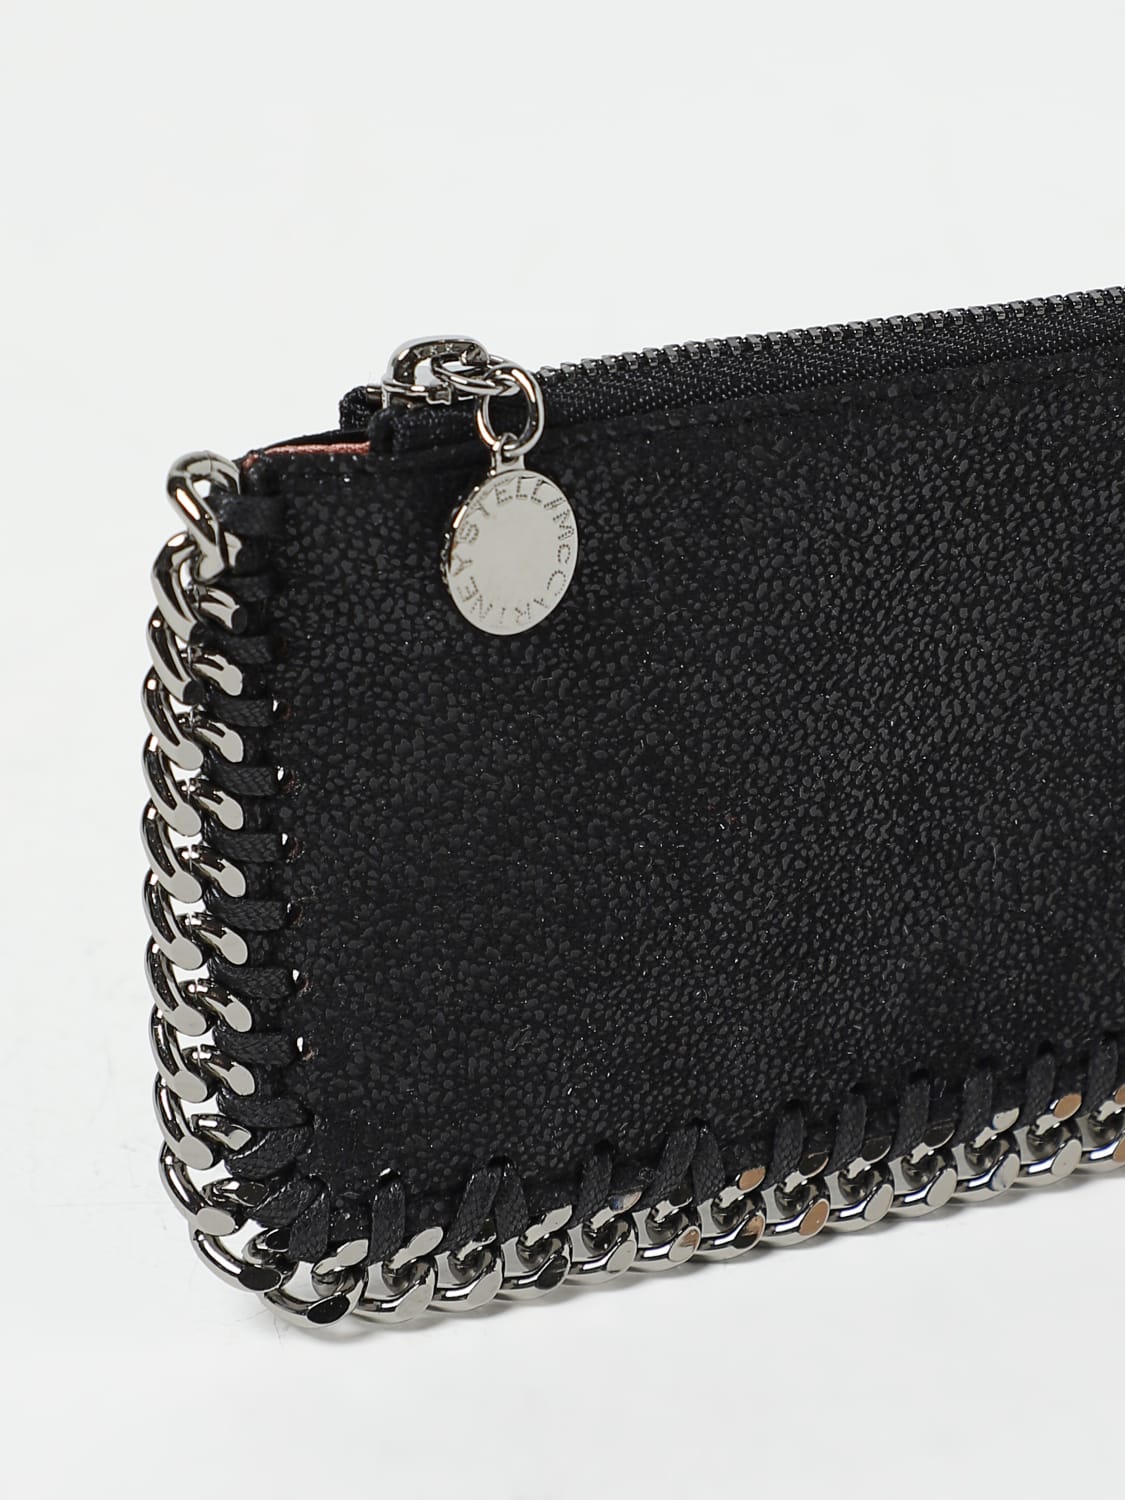 Stella McCartney credit card holder in synthetic leather